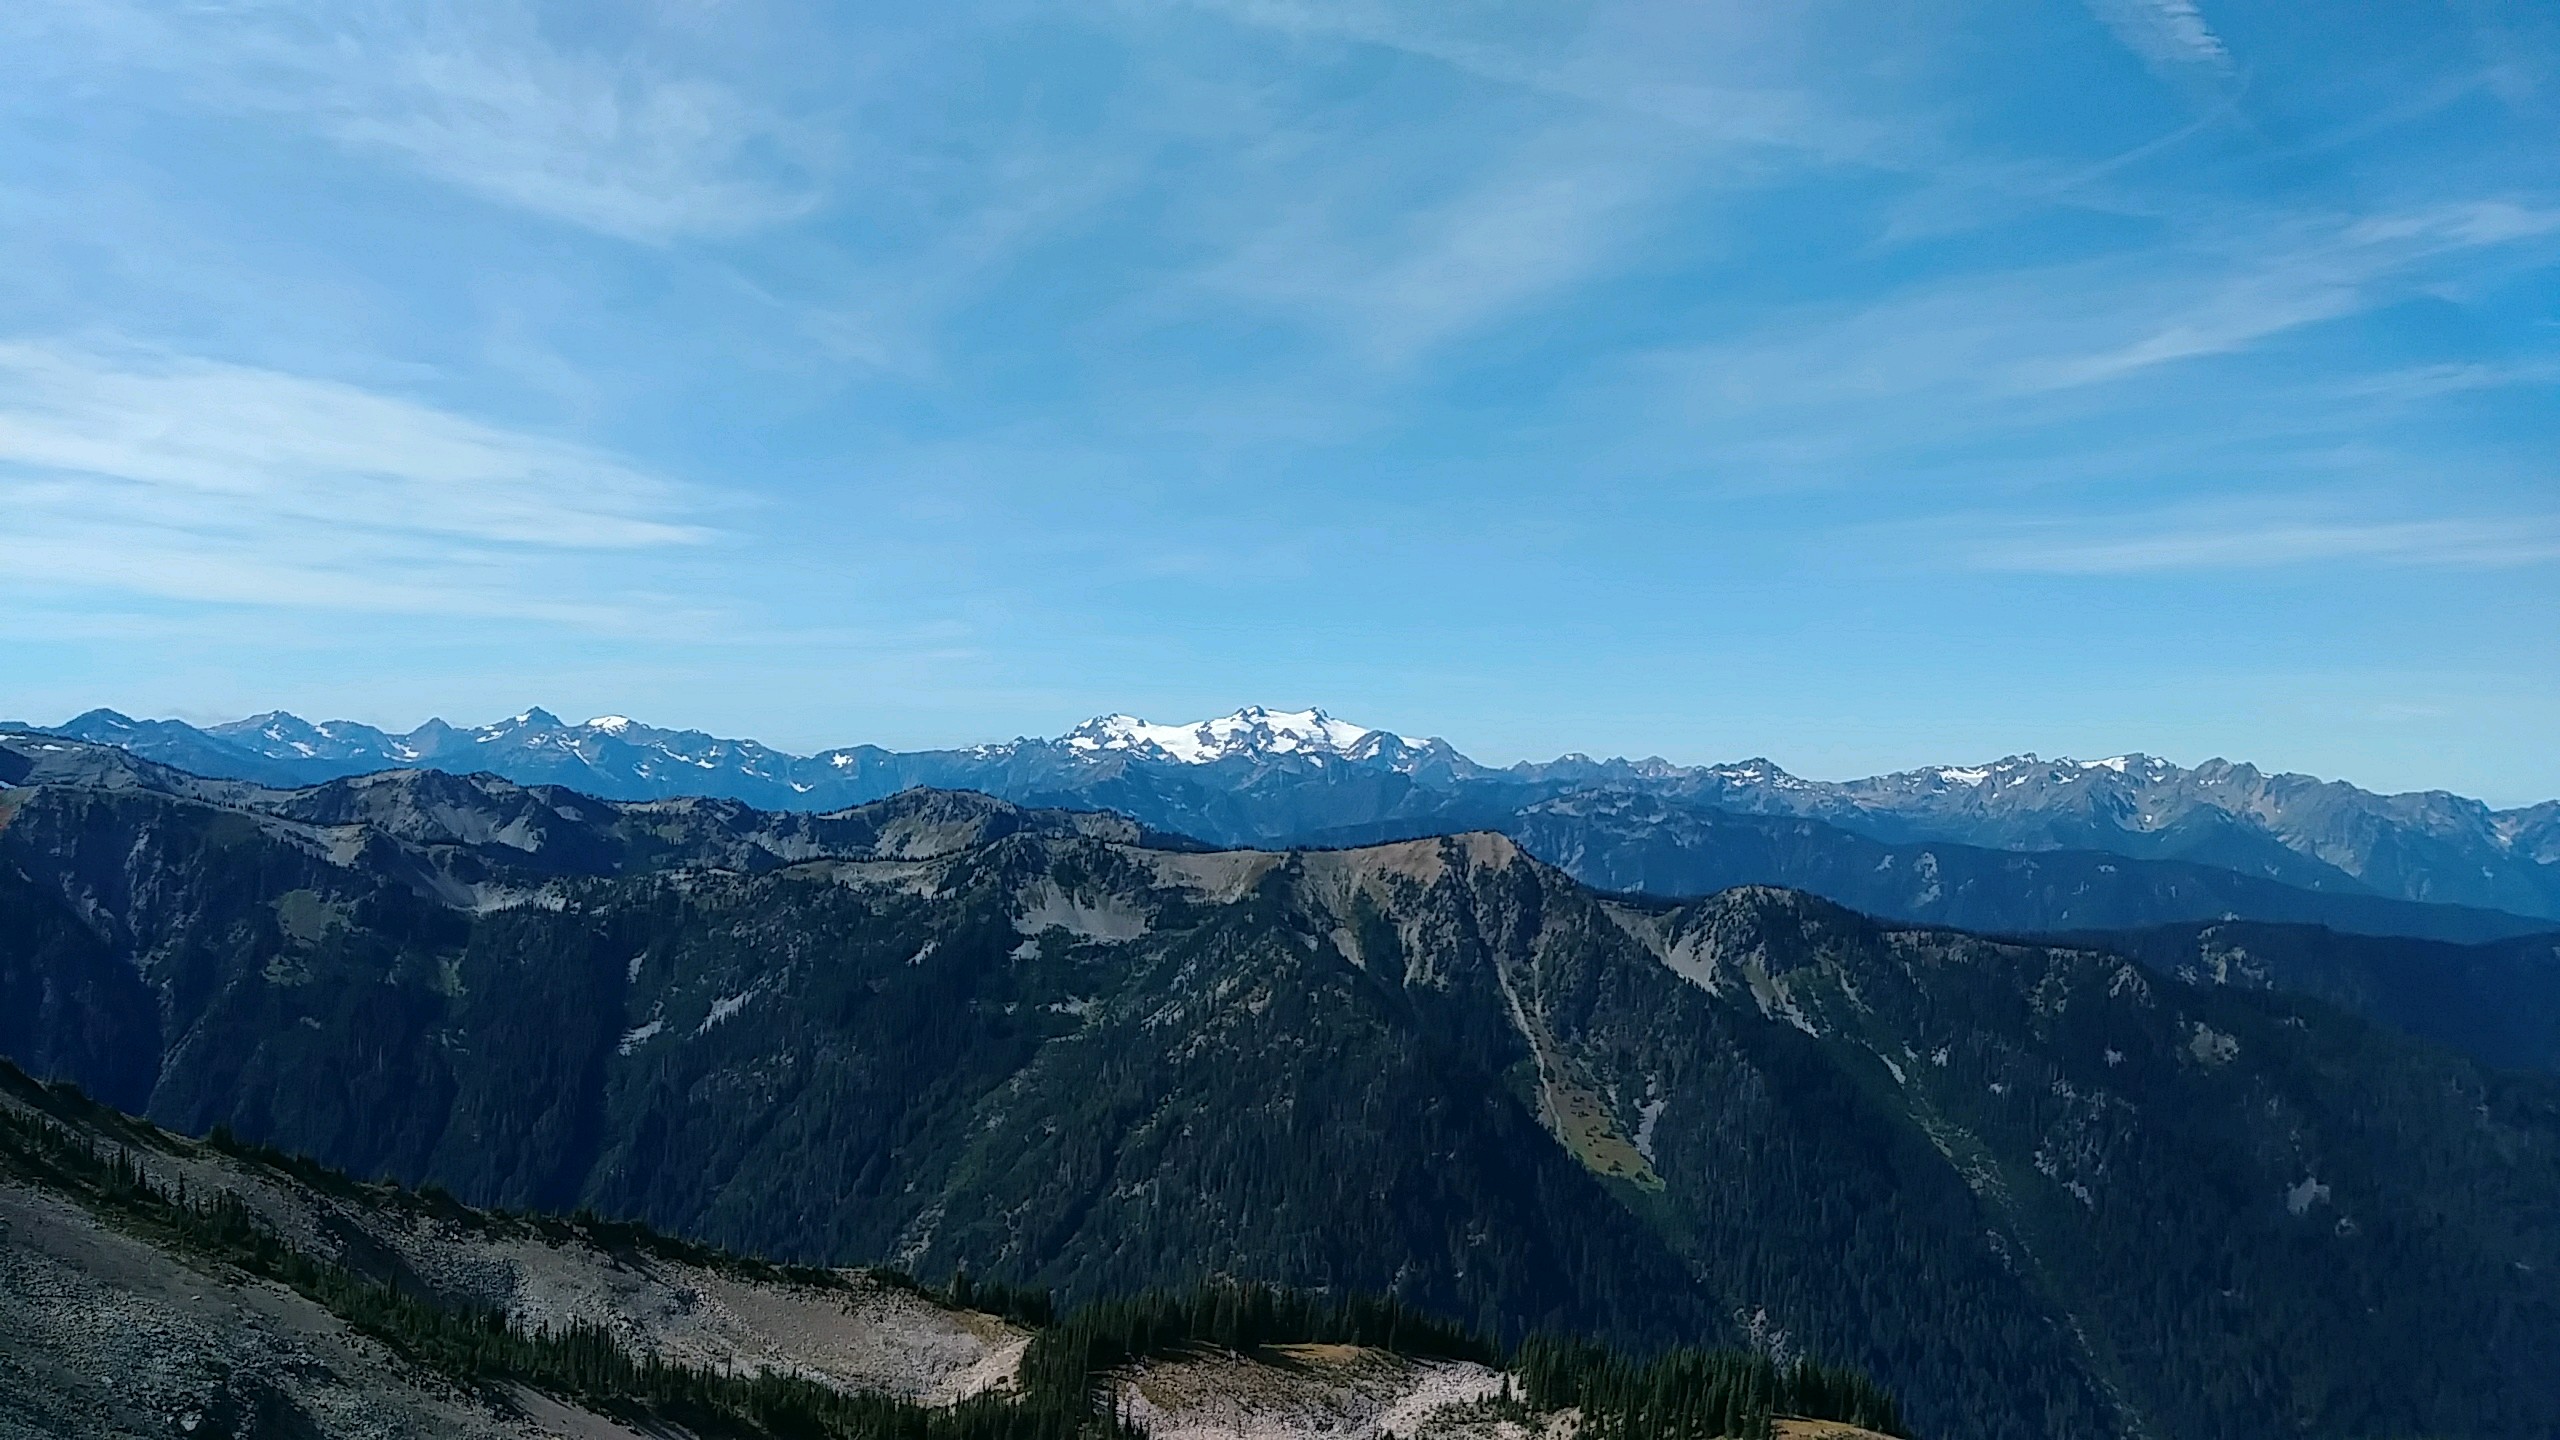 The Olympic Mountains